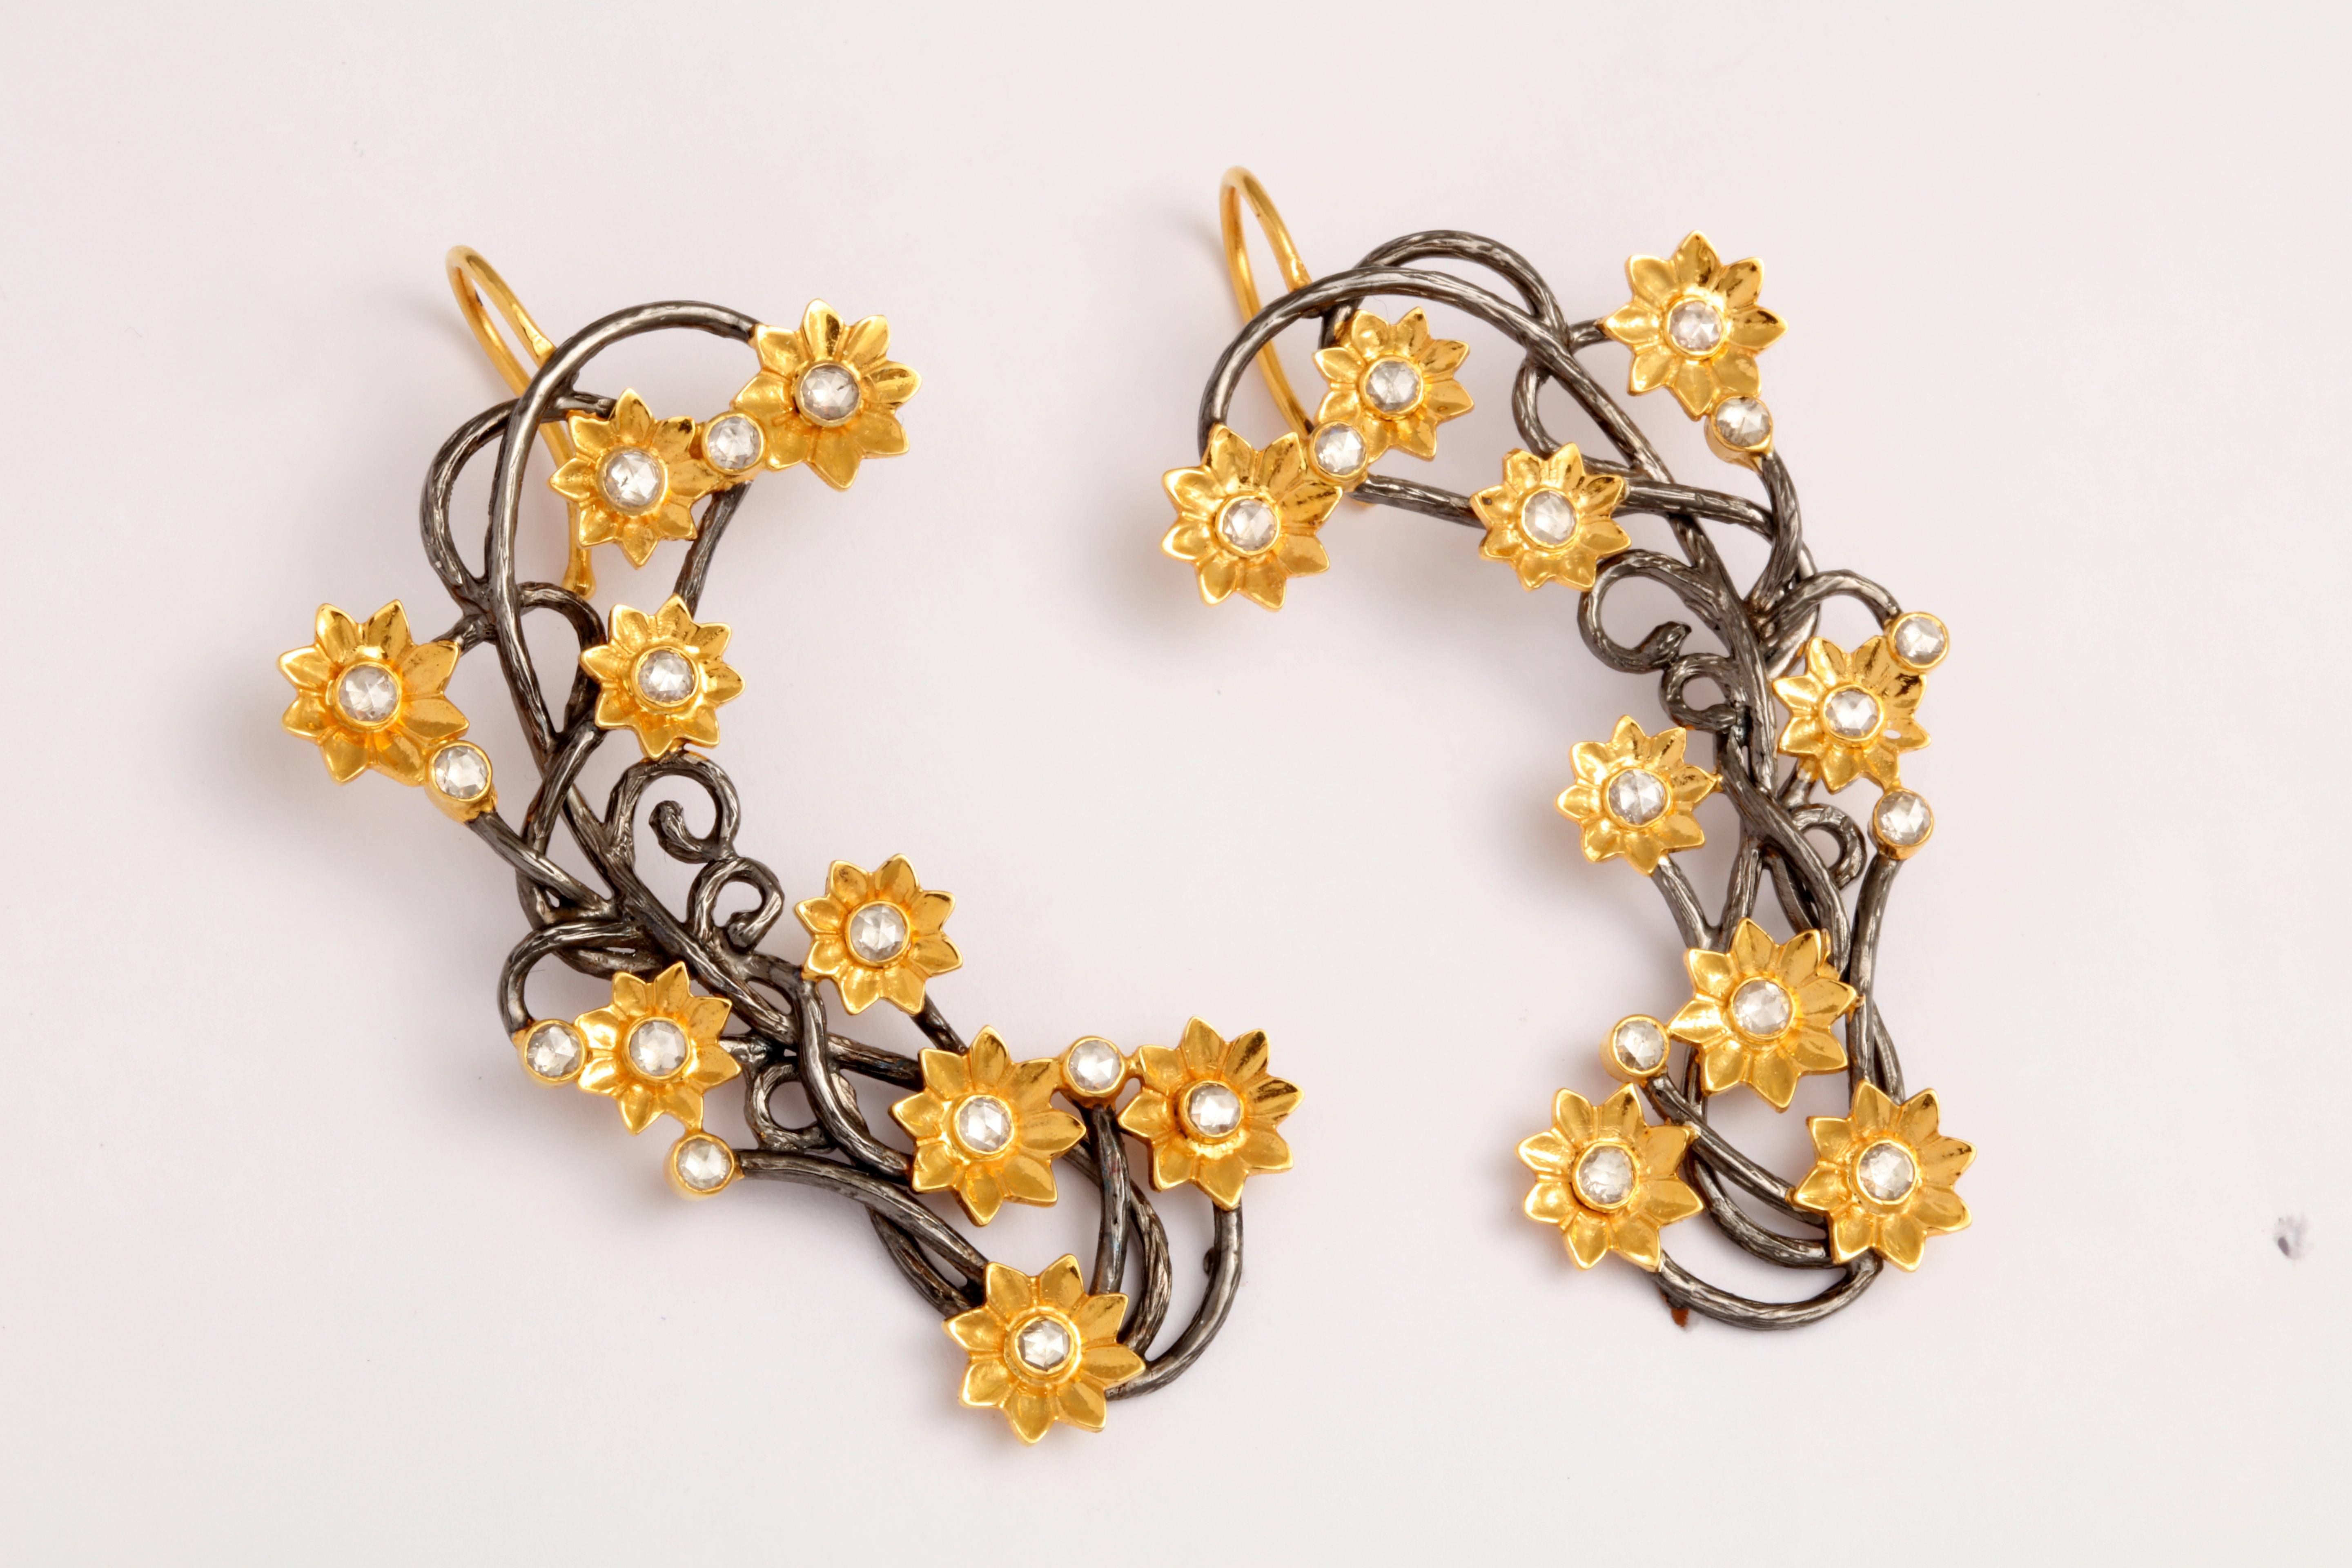 A par of ear cuffs composed of rhodium plated sterling silver vines, 18kt yellow gold flowers and rose cut diamonds.There are 1.68 cts of diamonds.

Length: 3.00 inches
Width: 1.15 inches 